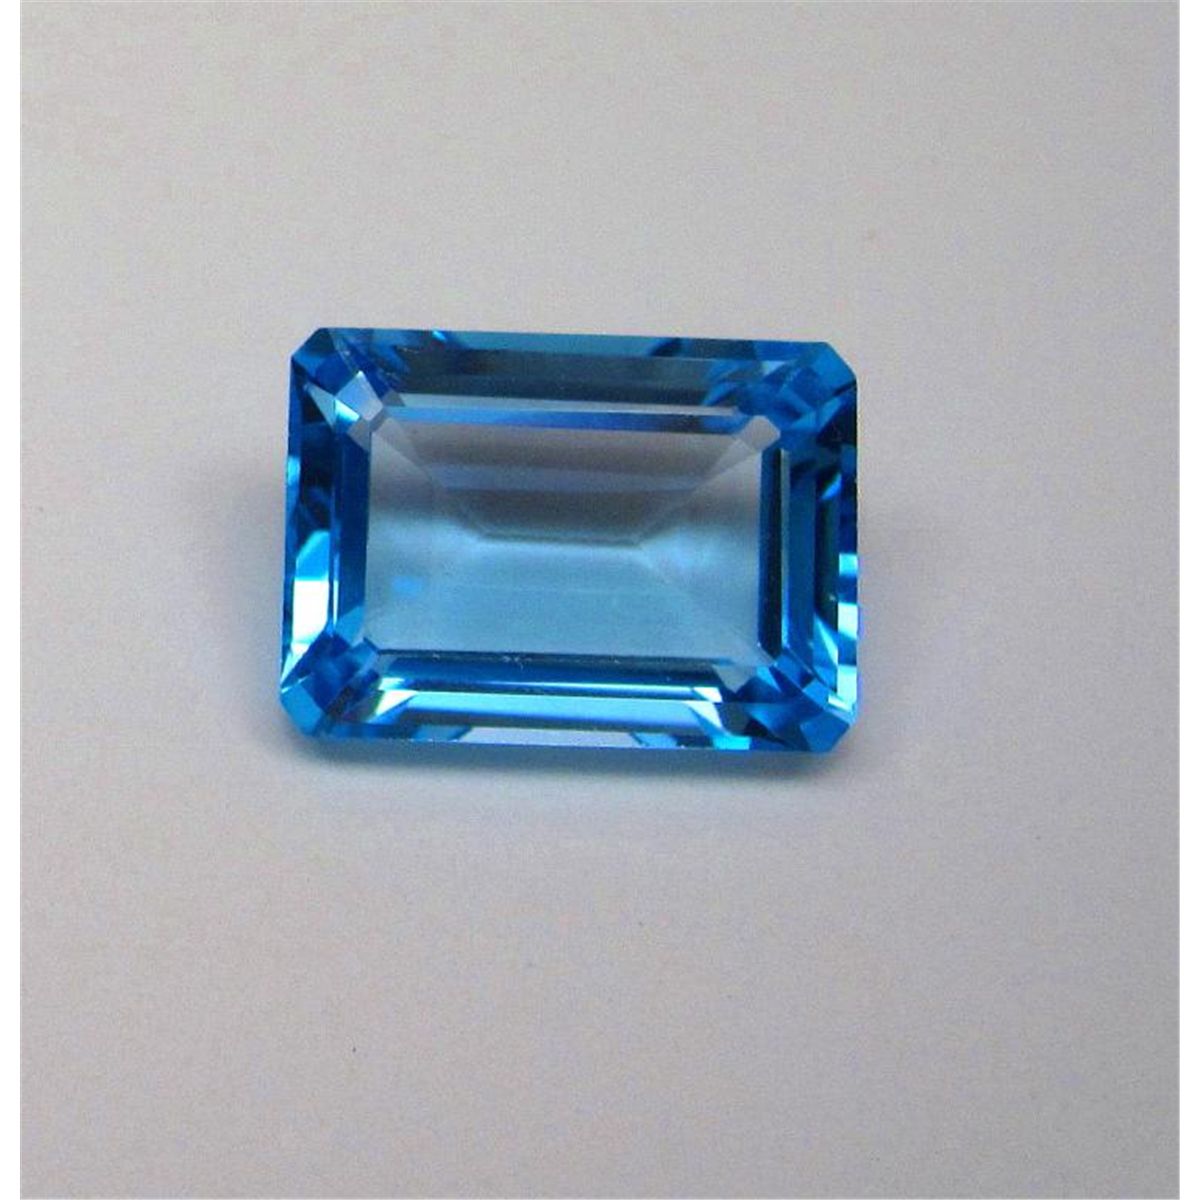 What Is The Significant Difference Between The London Blue Topaz And The Swiss Blue Topaz?